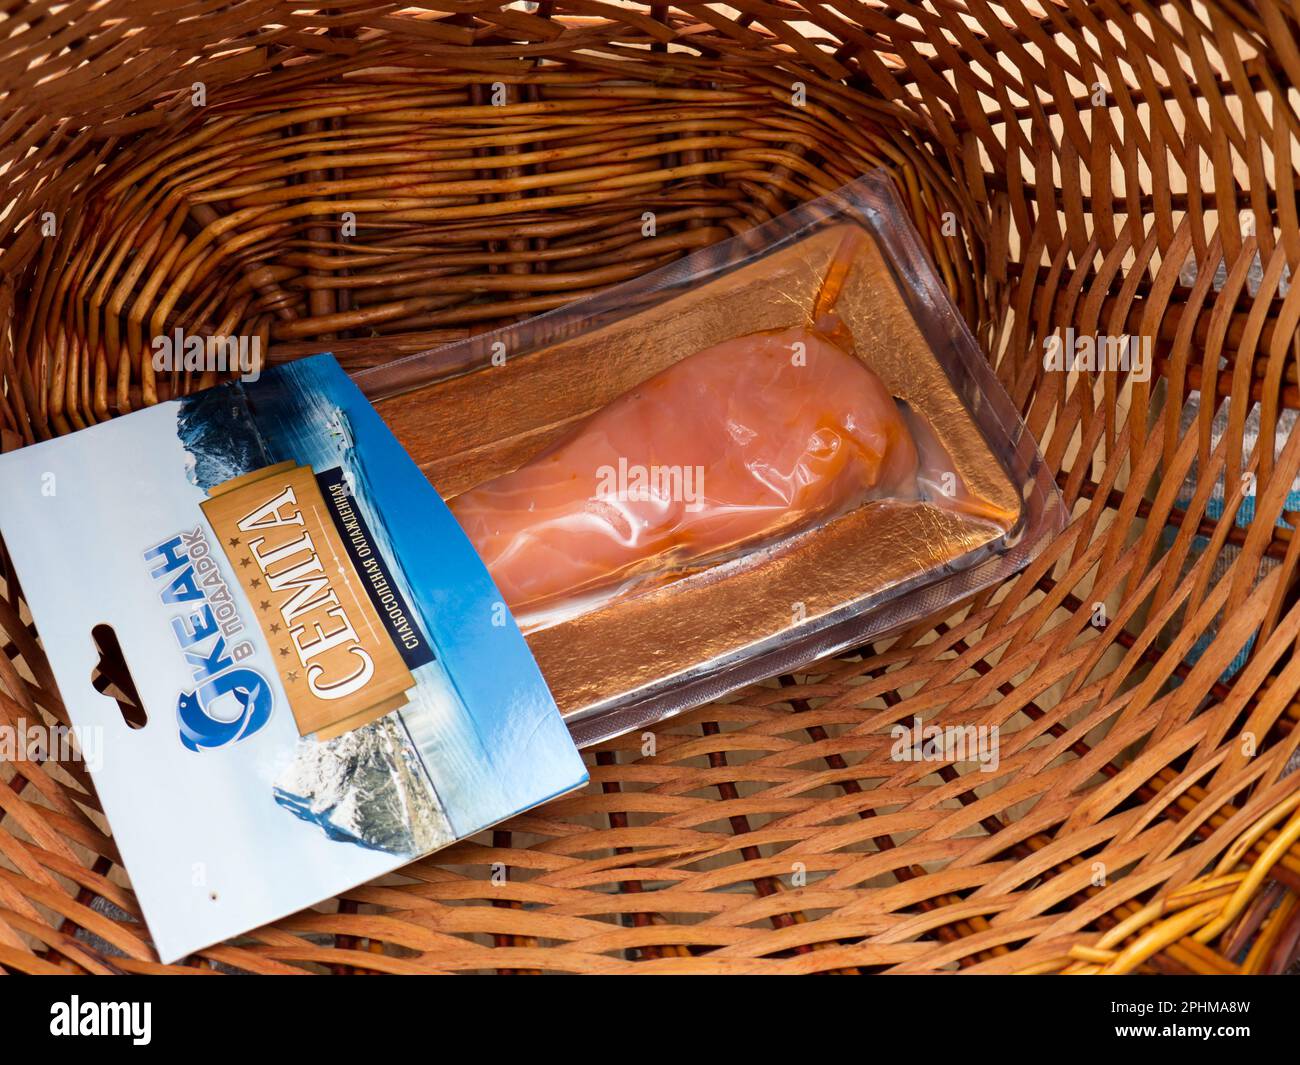 Rybtorg Salmon lightly salted chilled. Stock Photo